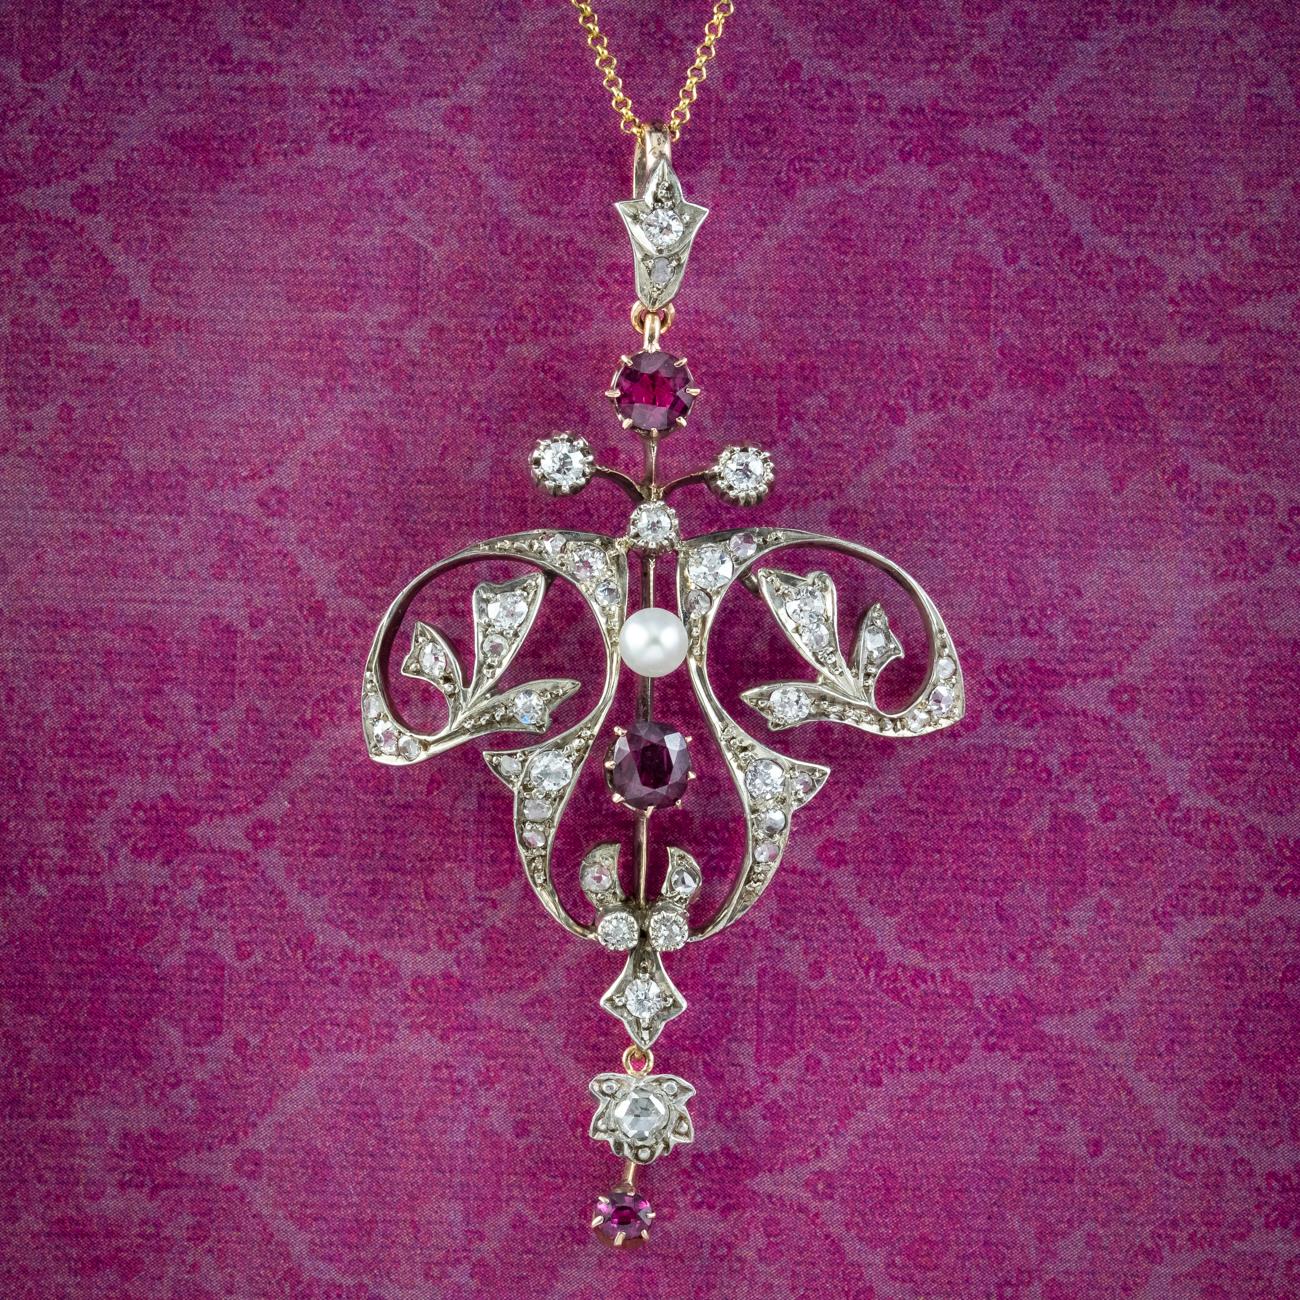 A stunning antique Victorian Art Nouveau pendant from the late 1800s decorated with an array of twinkling old cut diamonds (approx. 1ct) three cherry-pink rubies (approx. 0.90ct) and a central pearl.

Ruby is the birthstone of July and has long been